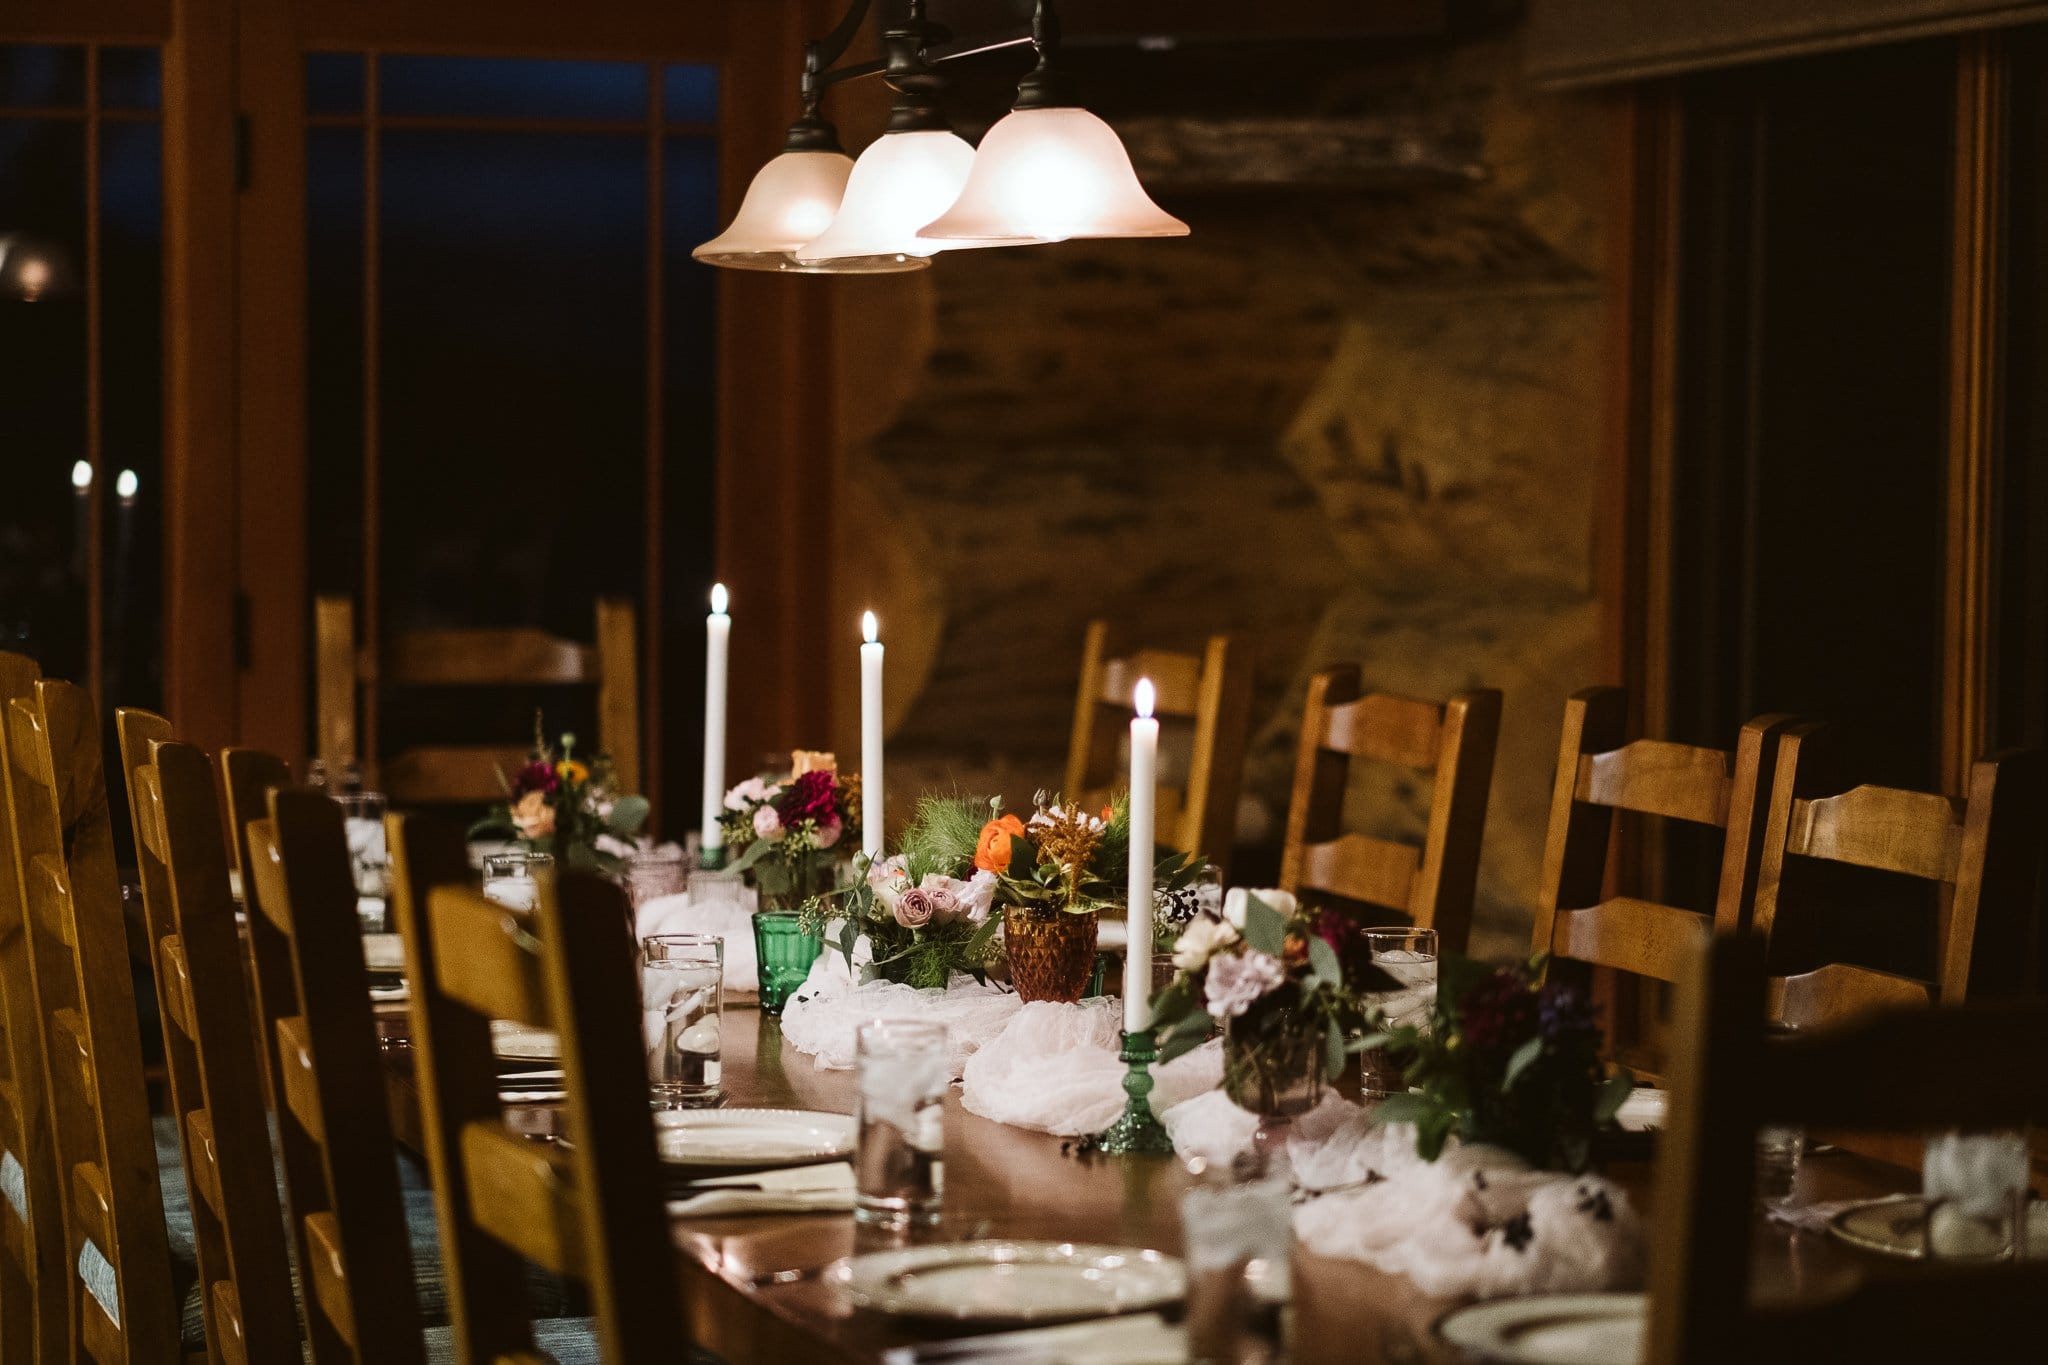 Decorated dining table for intimate elopement reception at private mountain home in the Colorado mountains